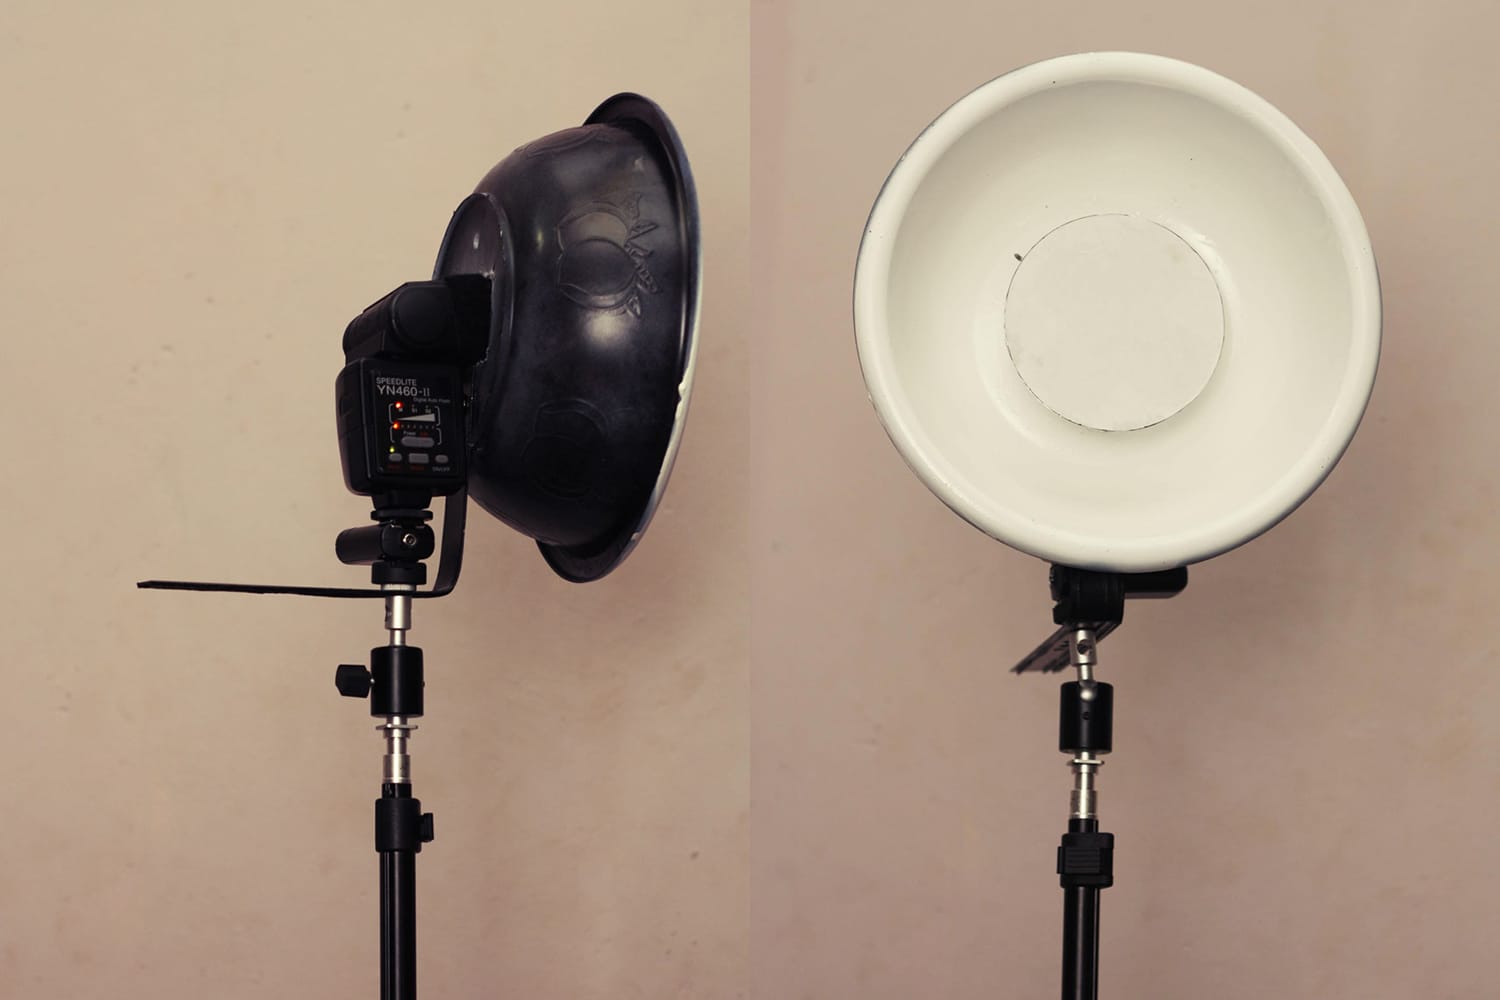 10 Simple and Inexpensive DIY Photography Gear Projects